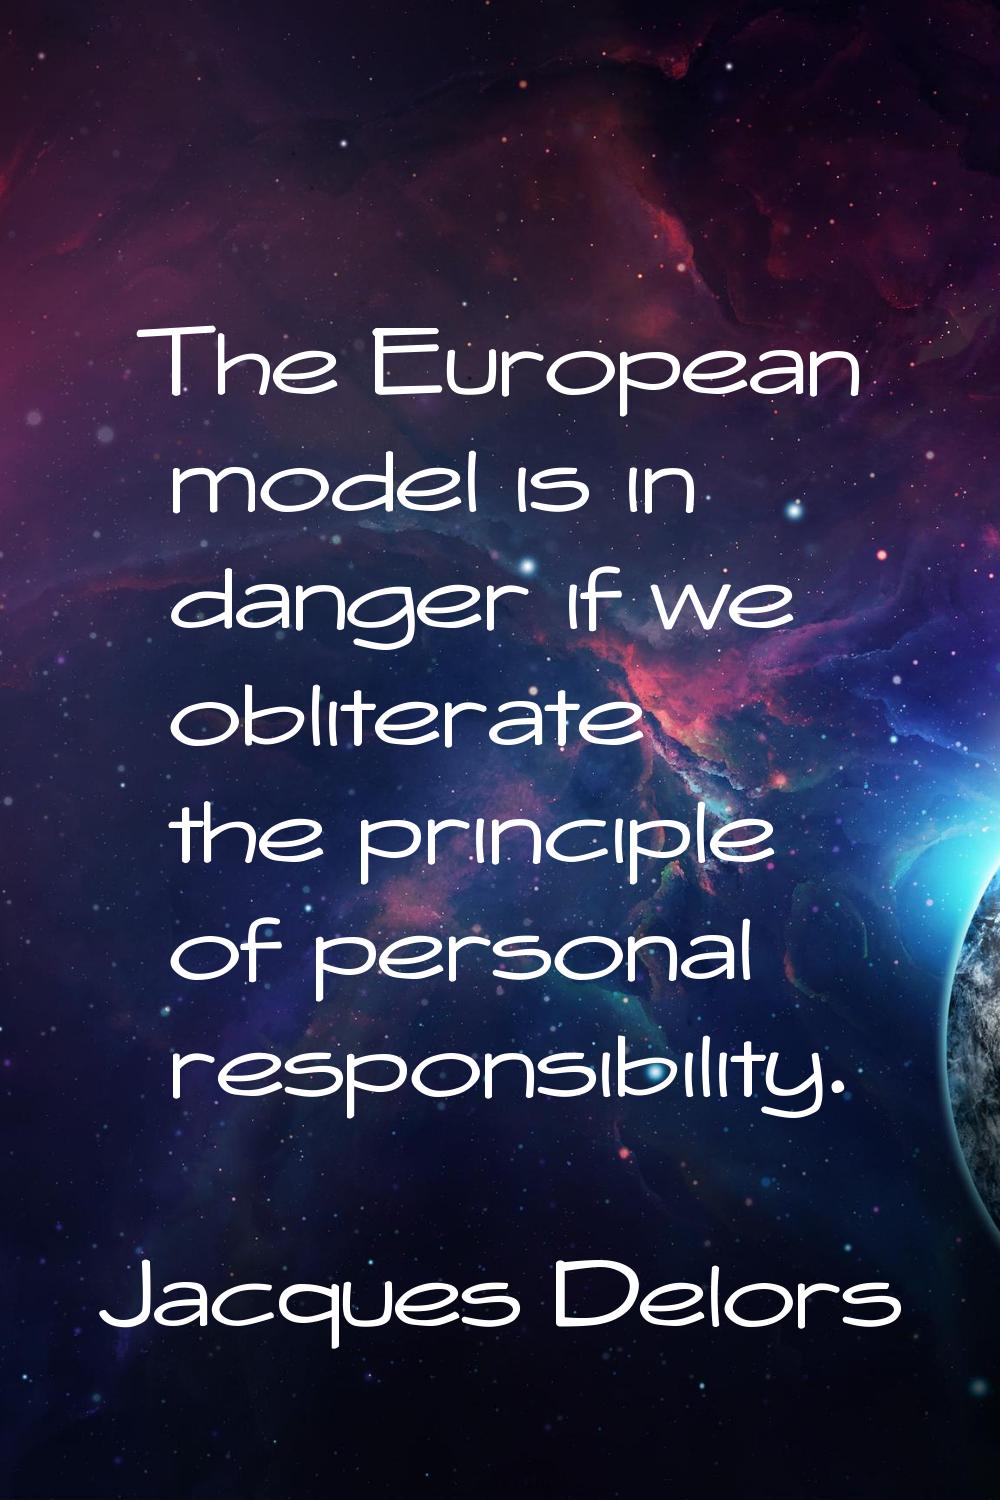 The European model is in danger if we obliterate the principle of personal responsibility.